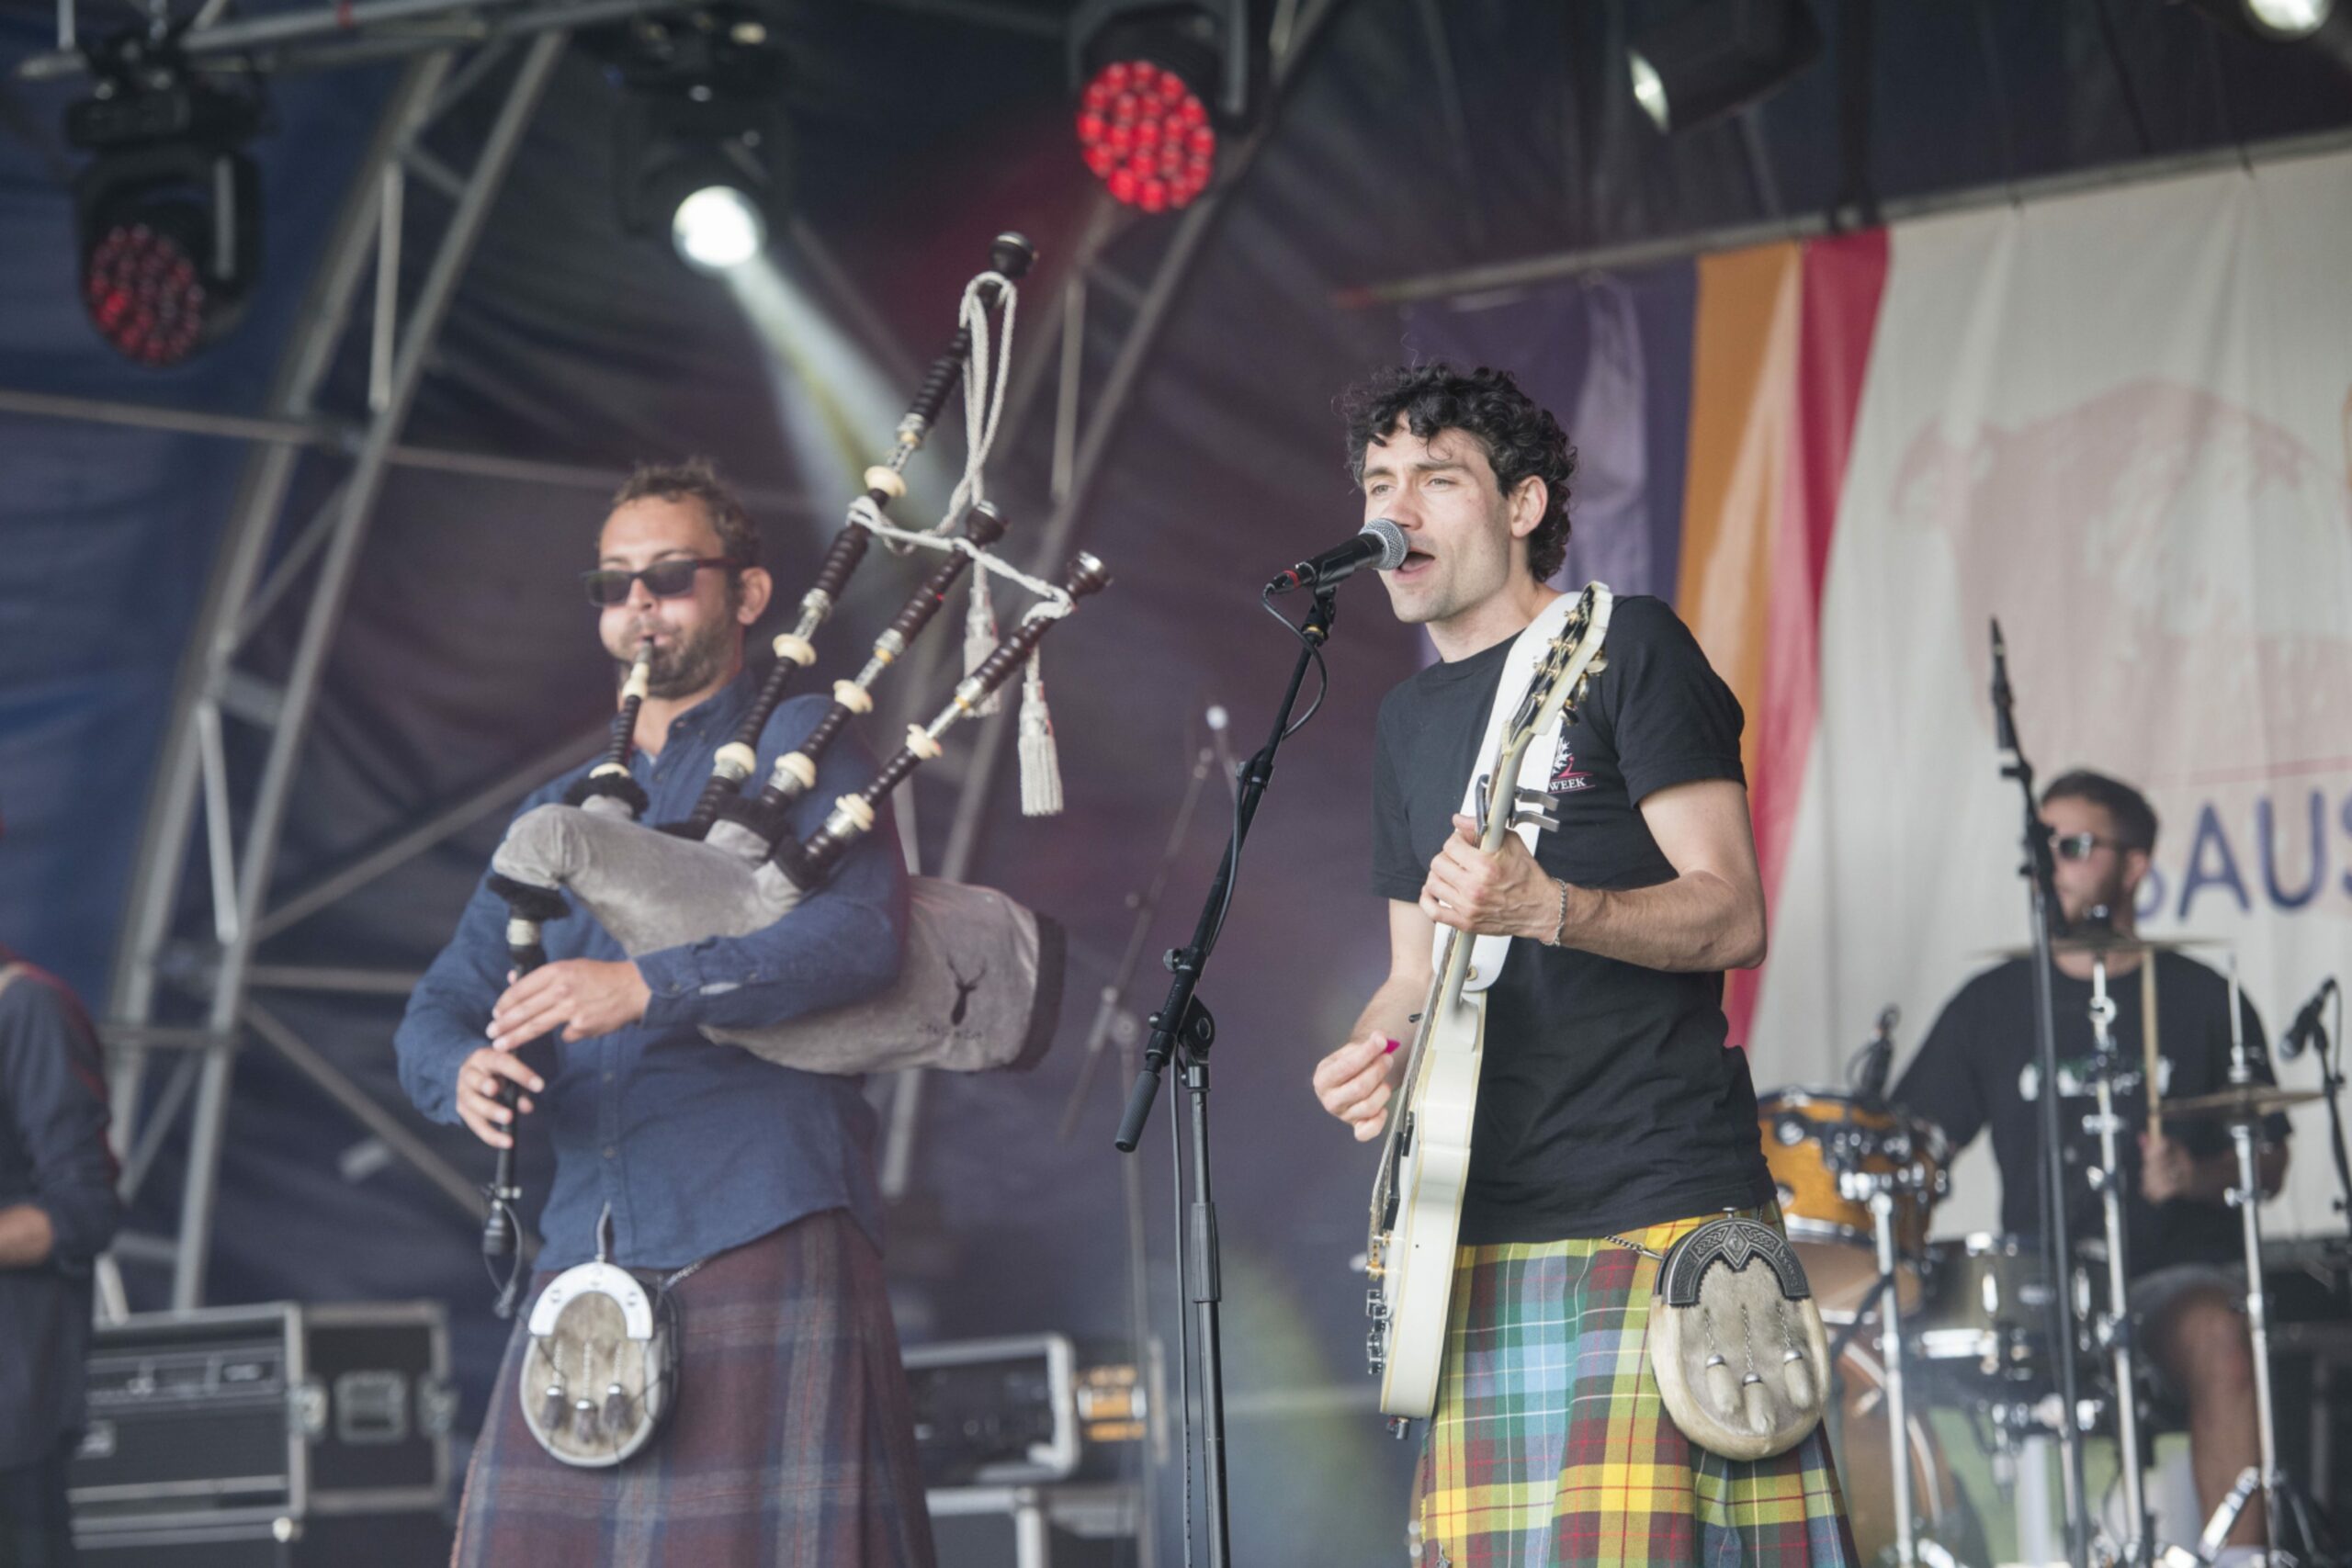 Gleadhraich on stage at the Sausage and Cider Festival at Dundee's Slessor Gardens.